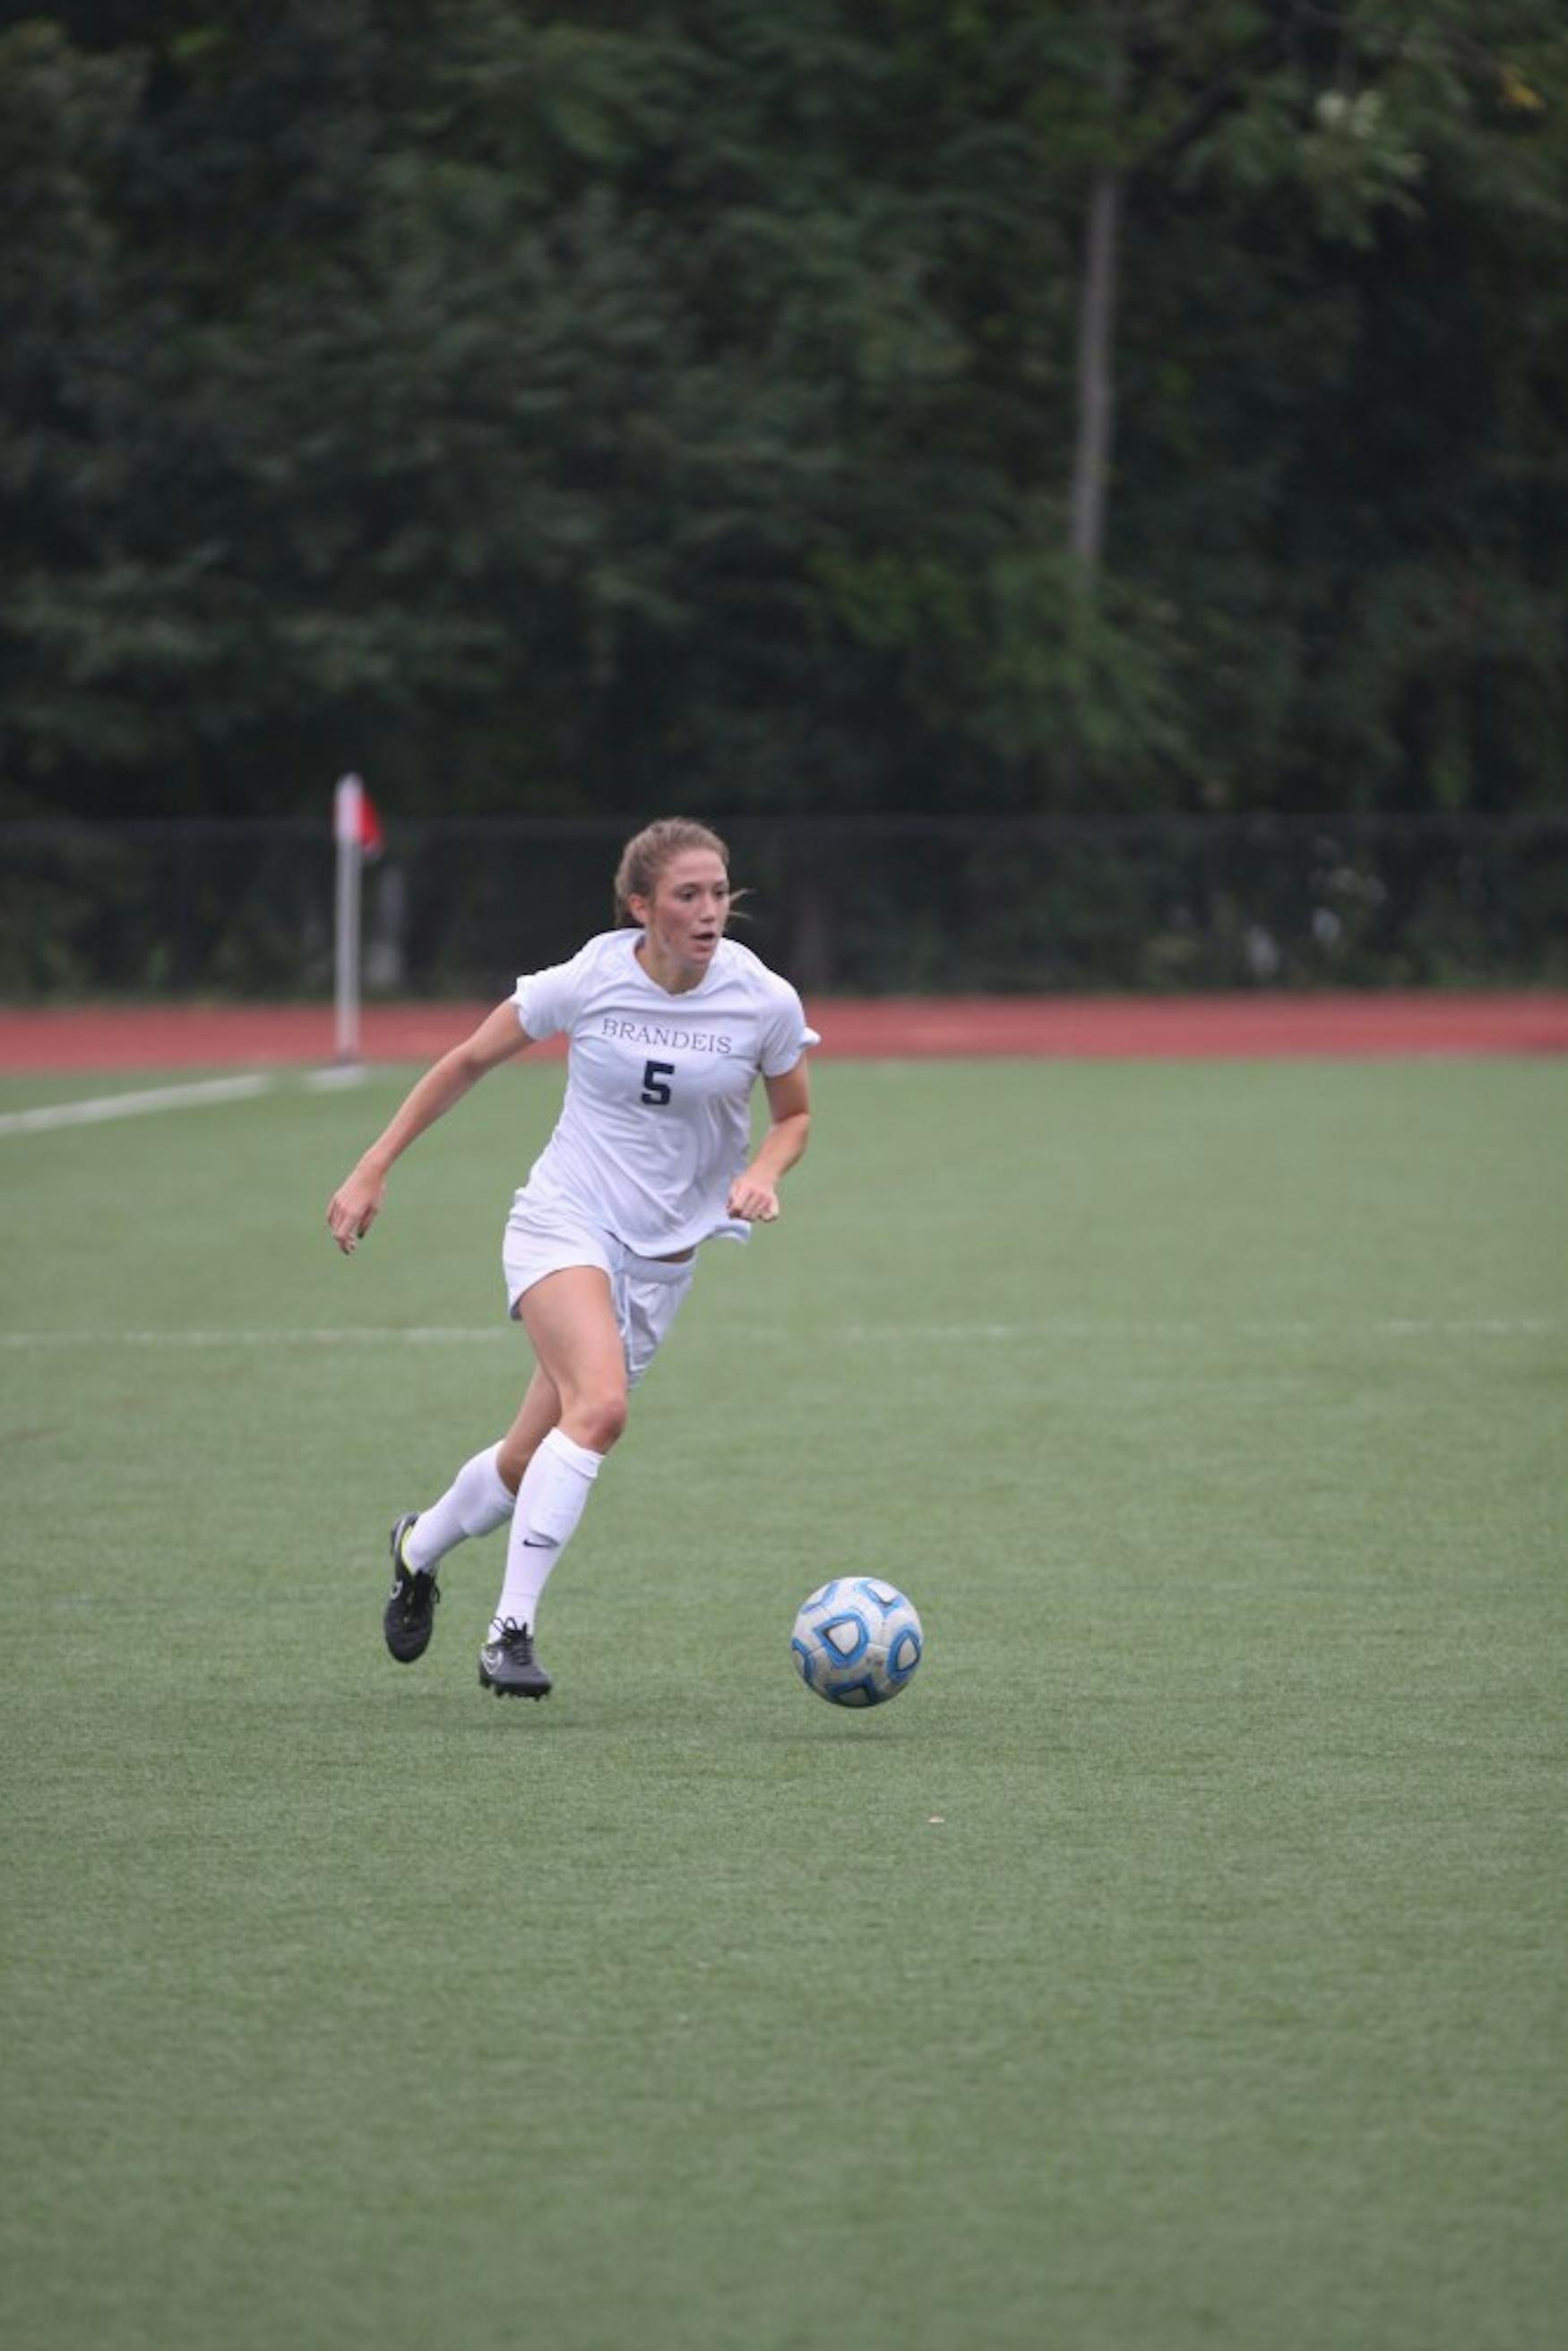 LEAPING AHEAD: Midfielder Mathilde Robinson ’16 brings the ball forward during a 3-0 victory over UMass Boston on Saturday.